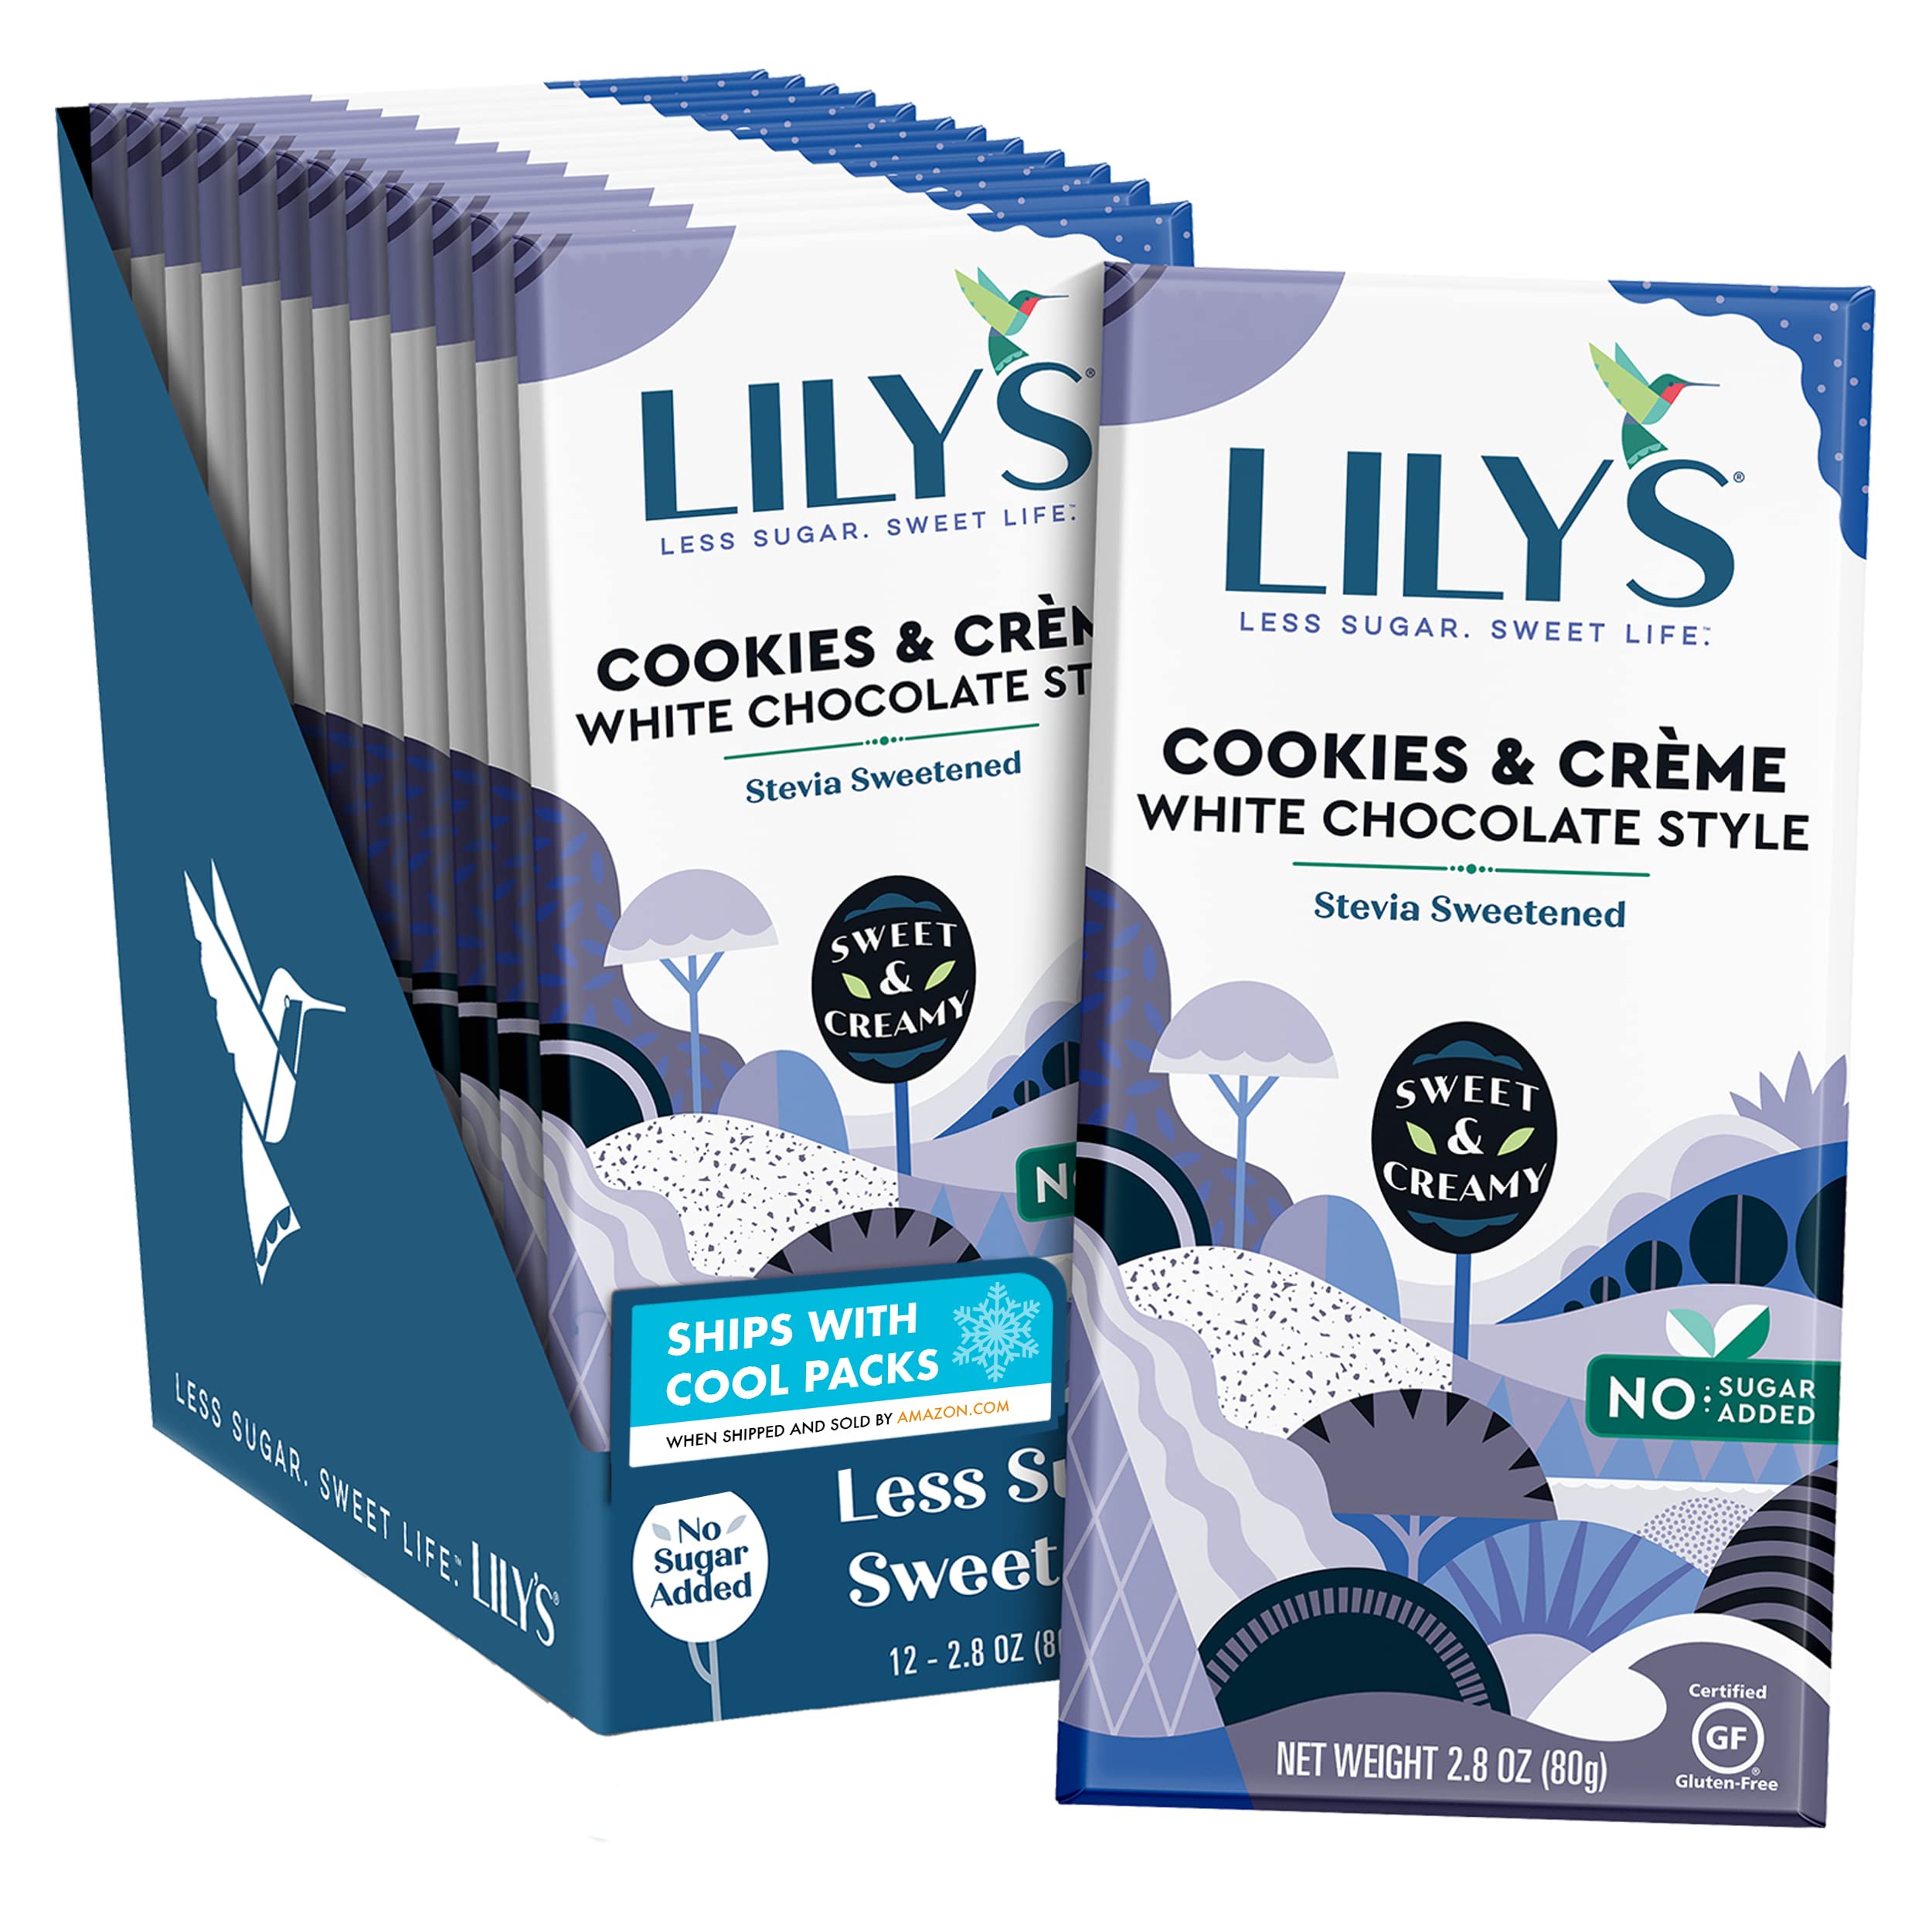 LILY'S Cookies and Crme White Chocolate Style, Individually Wrapped, Bulk No Sugar Added Sweets Bars, 2.8 oz (12 Count) $27.49 Amazon